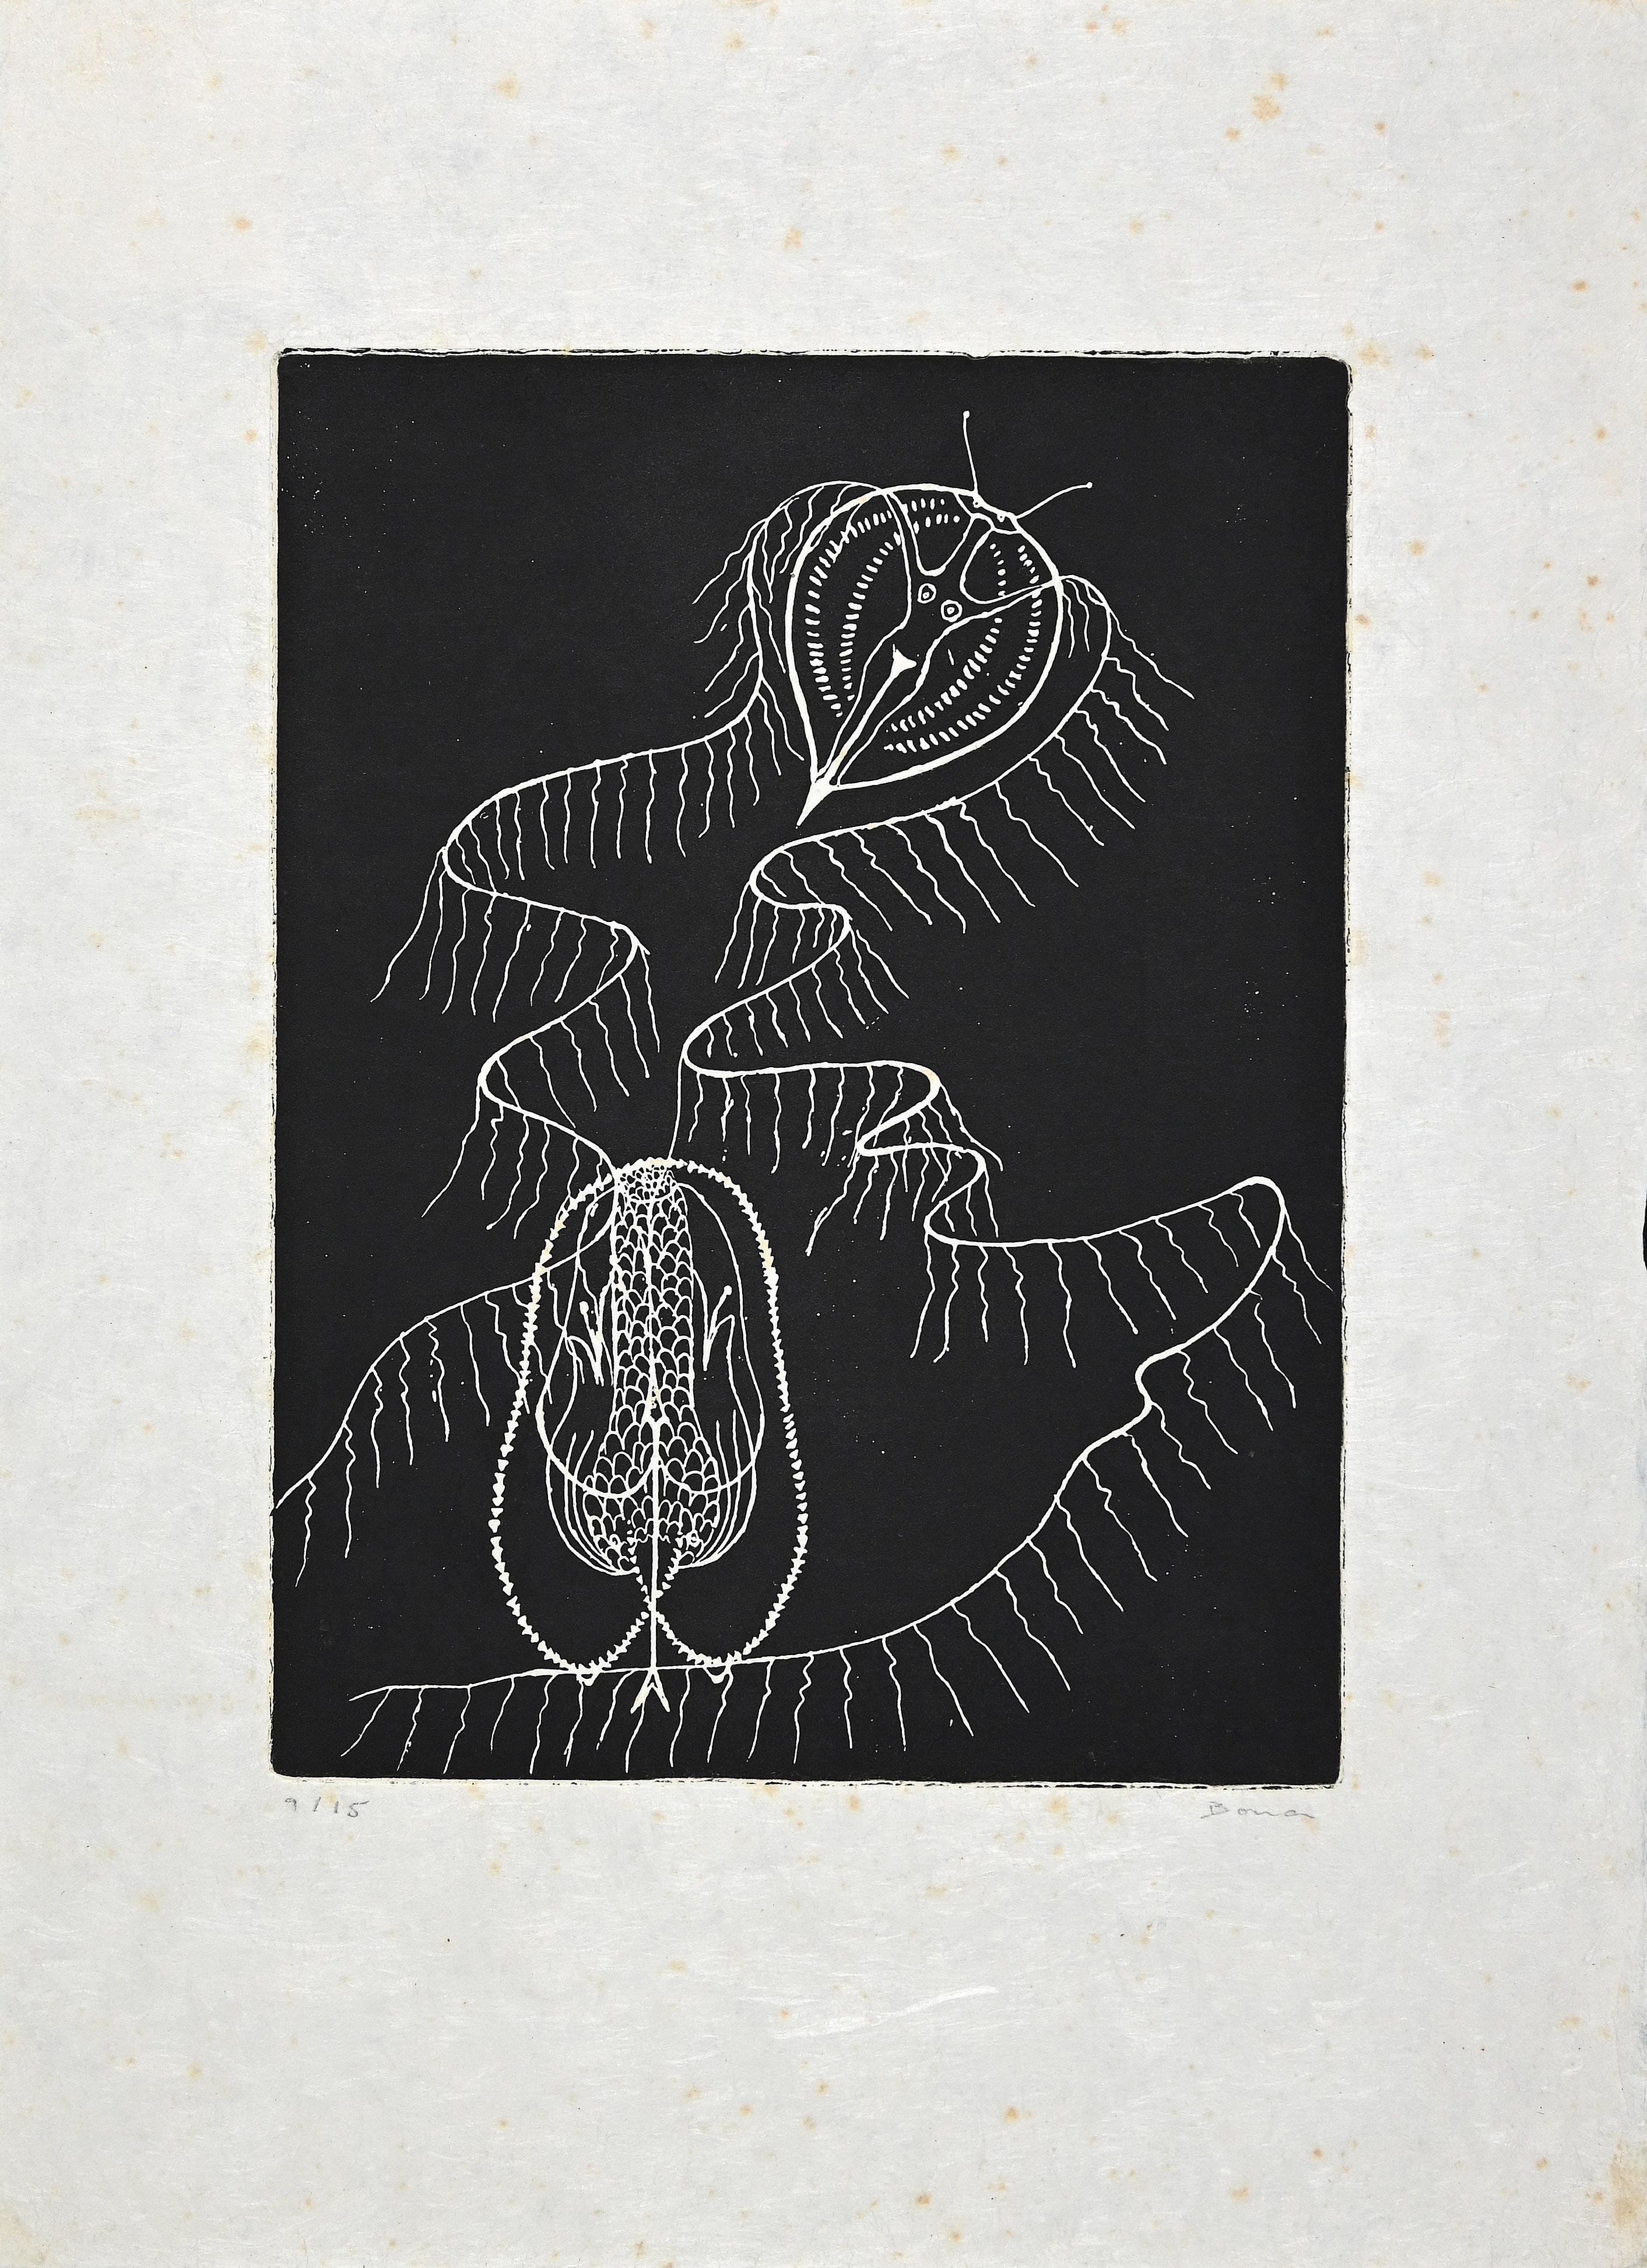 Untitled - Etching by Bona de Pisis - Late 20th Century